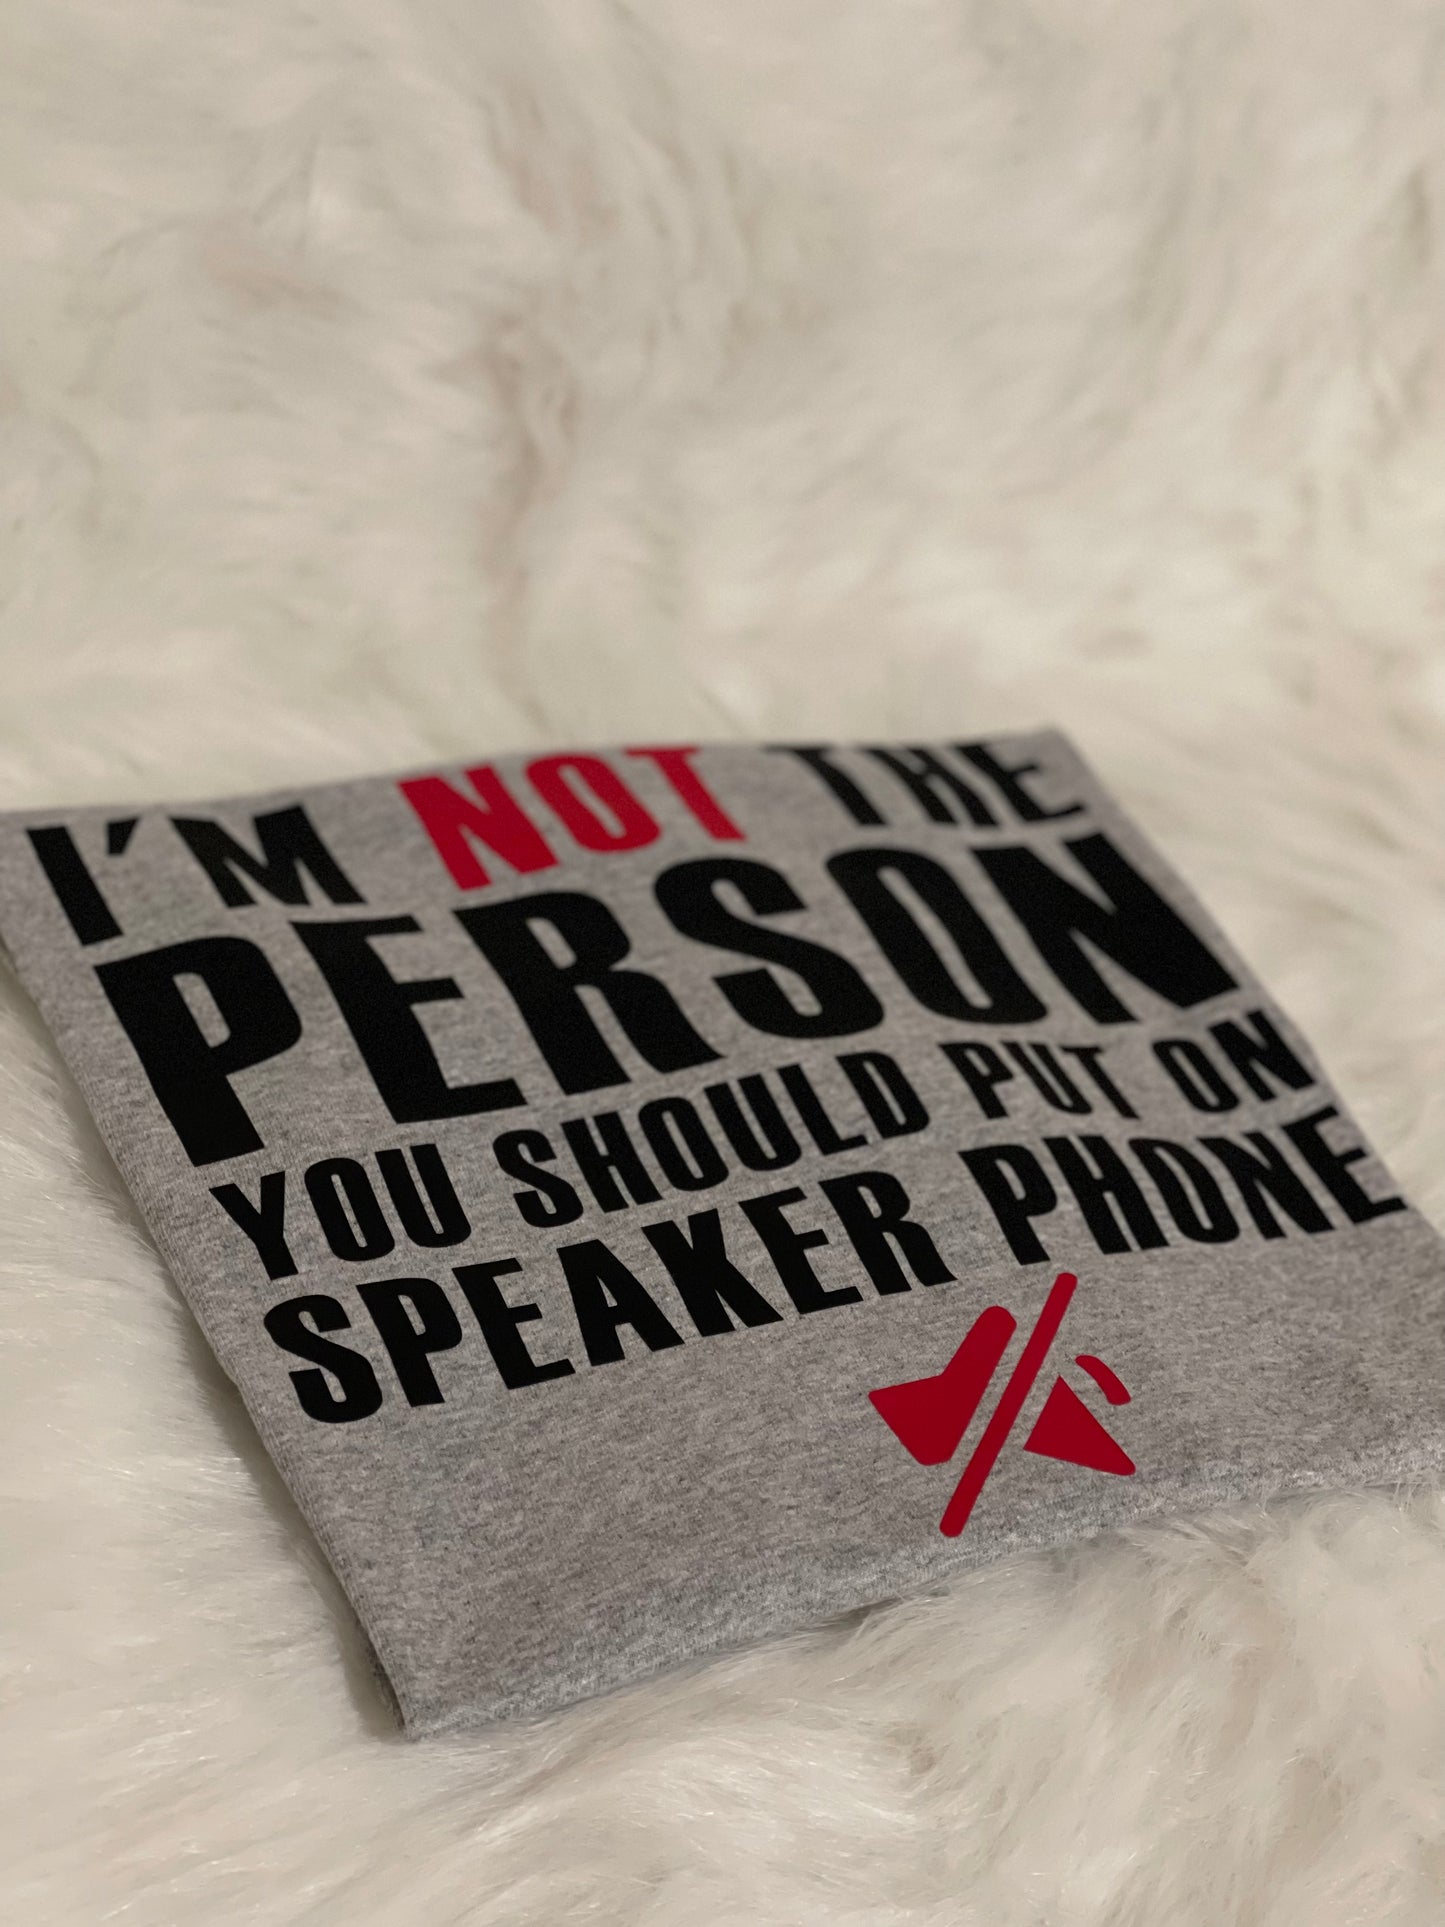 “ I’m Not The Person You Should Put On Speaker Phone”